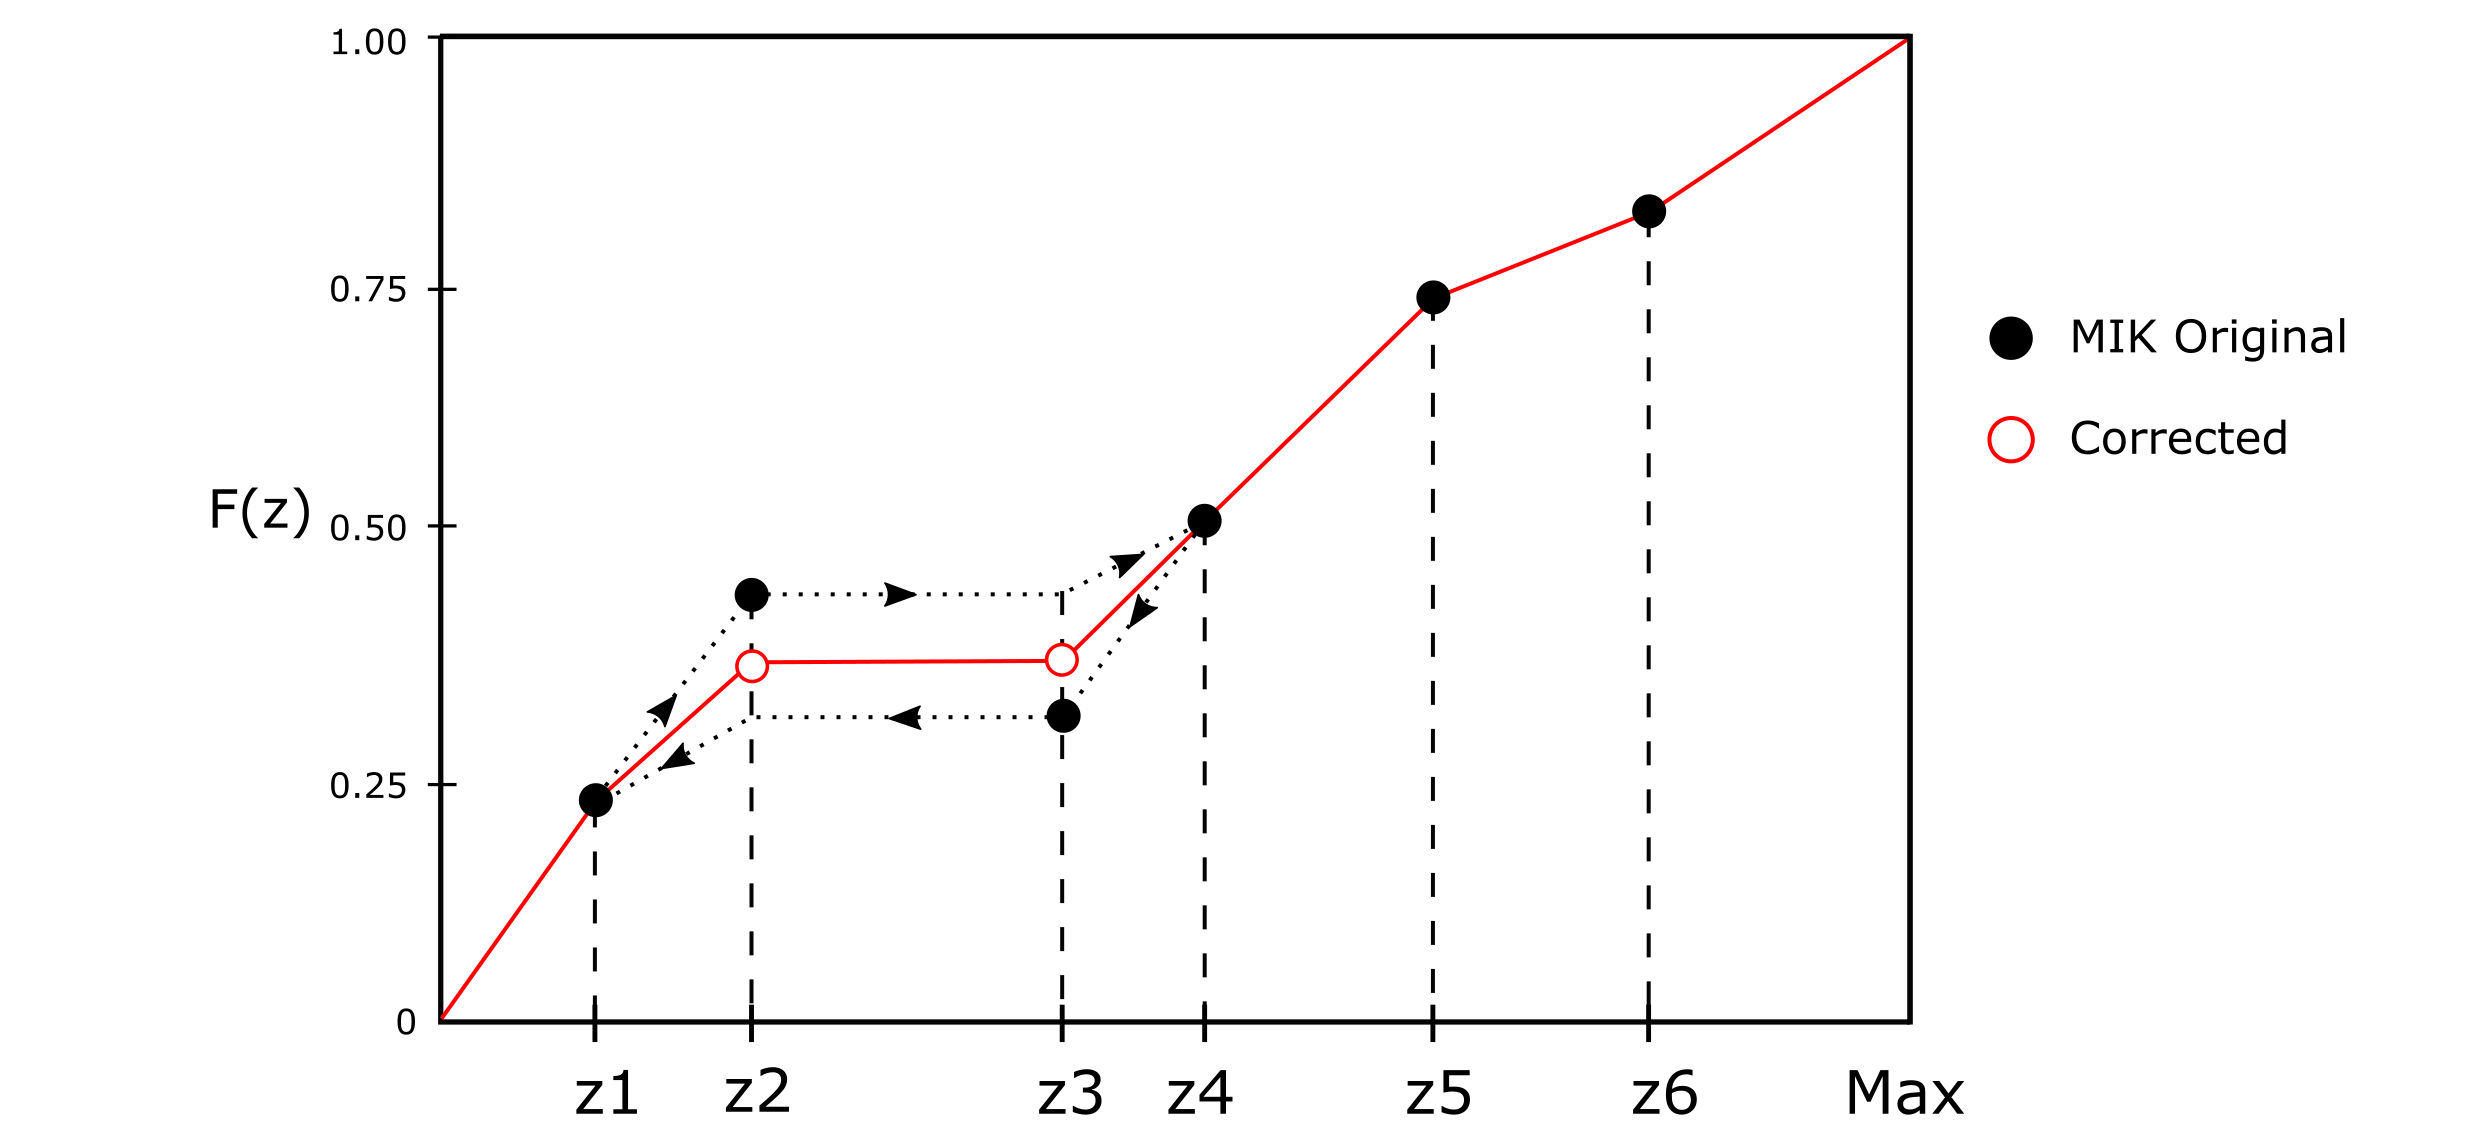 Order relation deviation and the applied correction. The points are the MIK estimates and the corrected CDF is obtained by averaging upward and downward corrections (Deutsch & Journel, 1998).